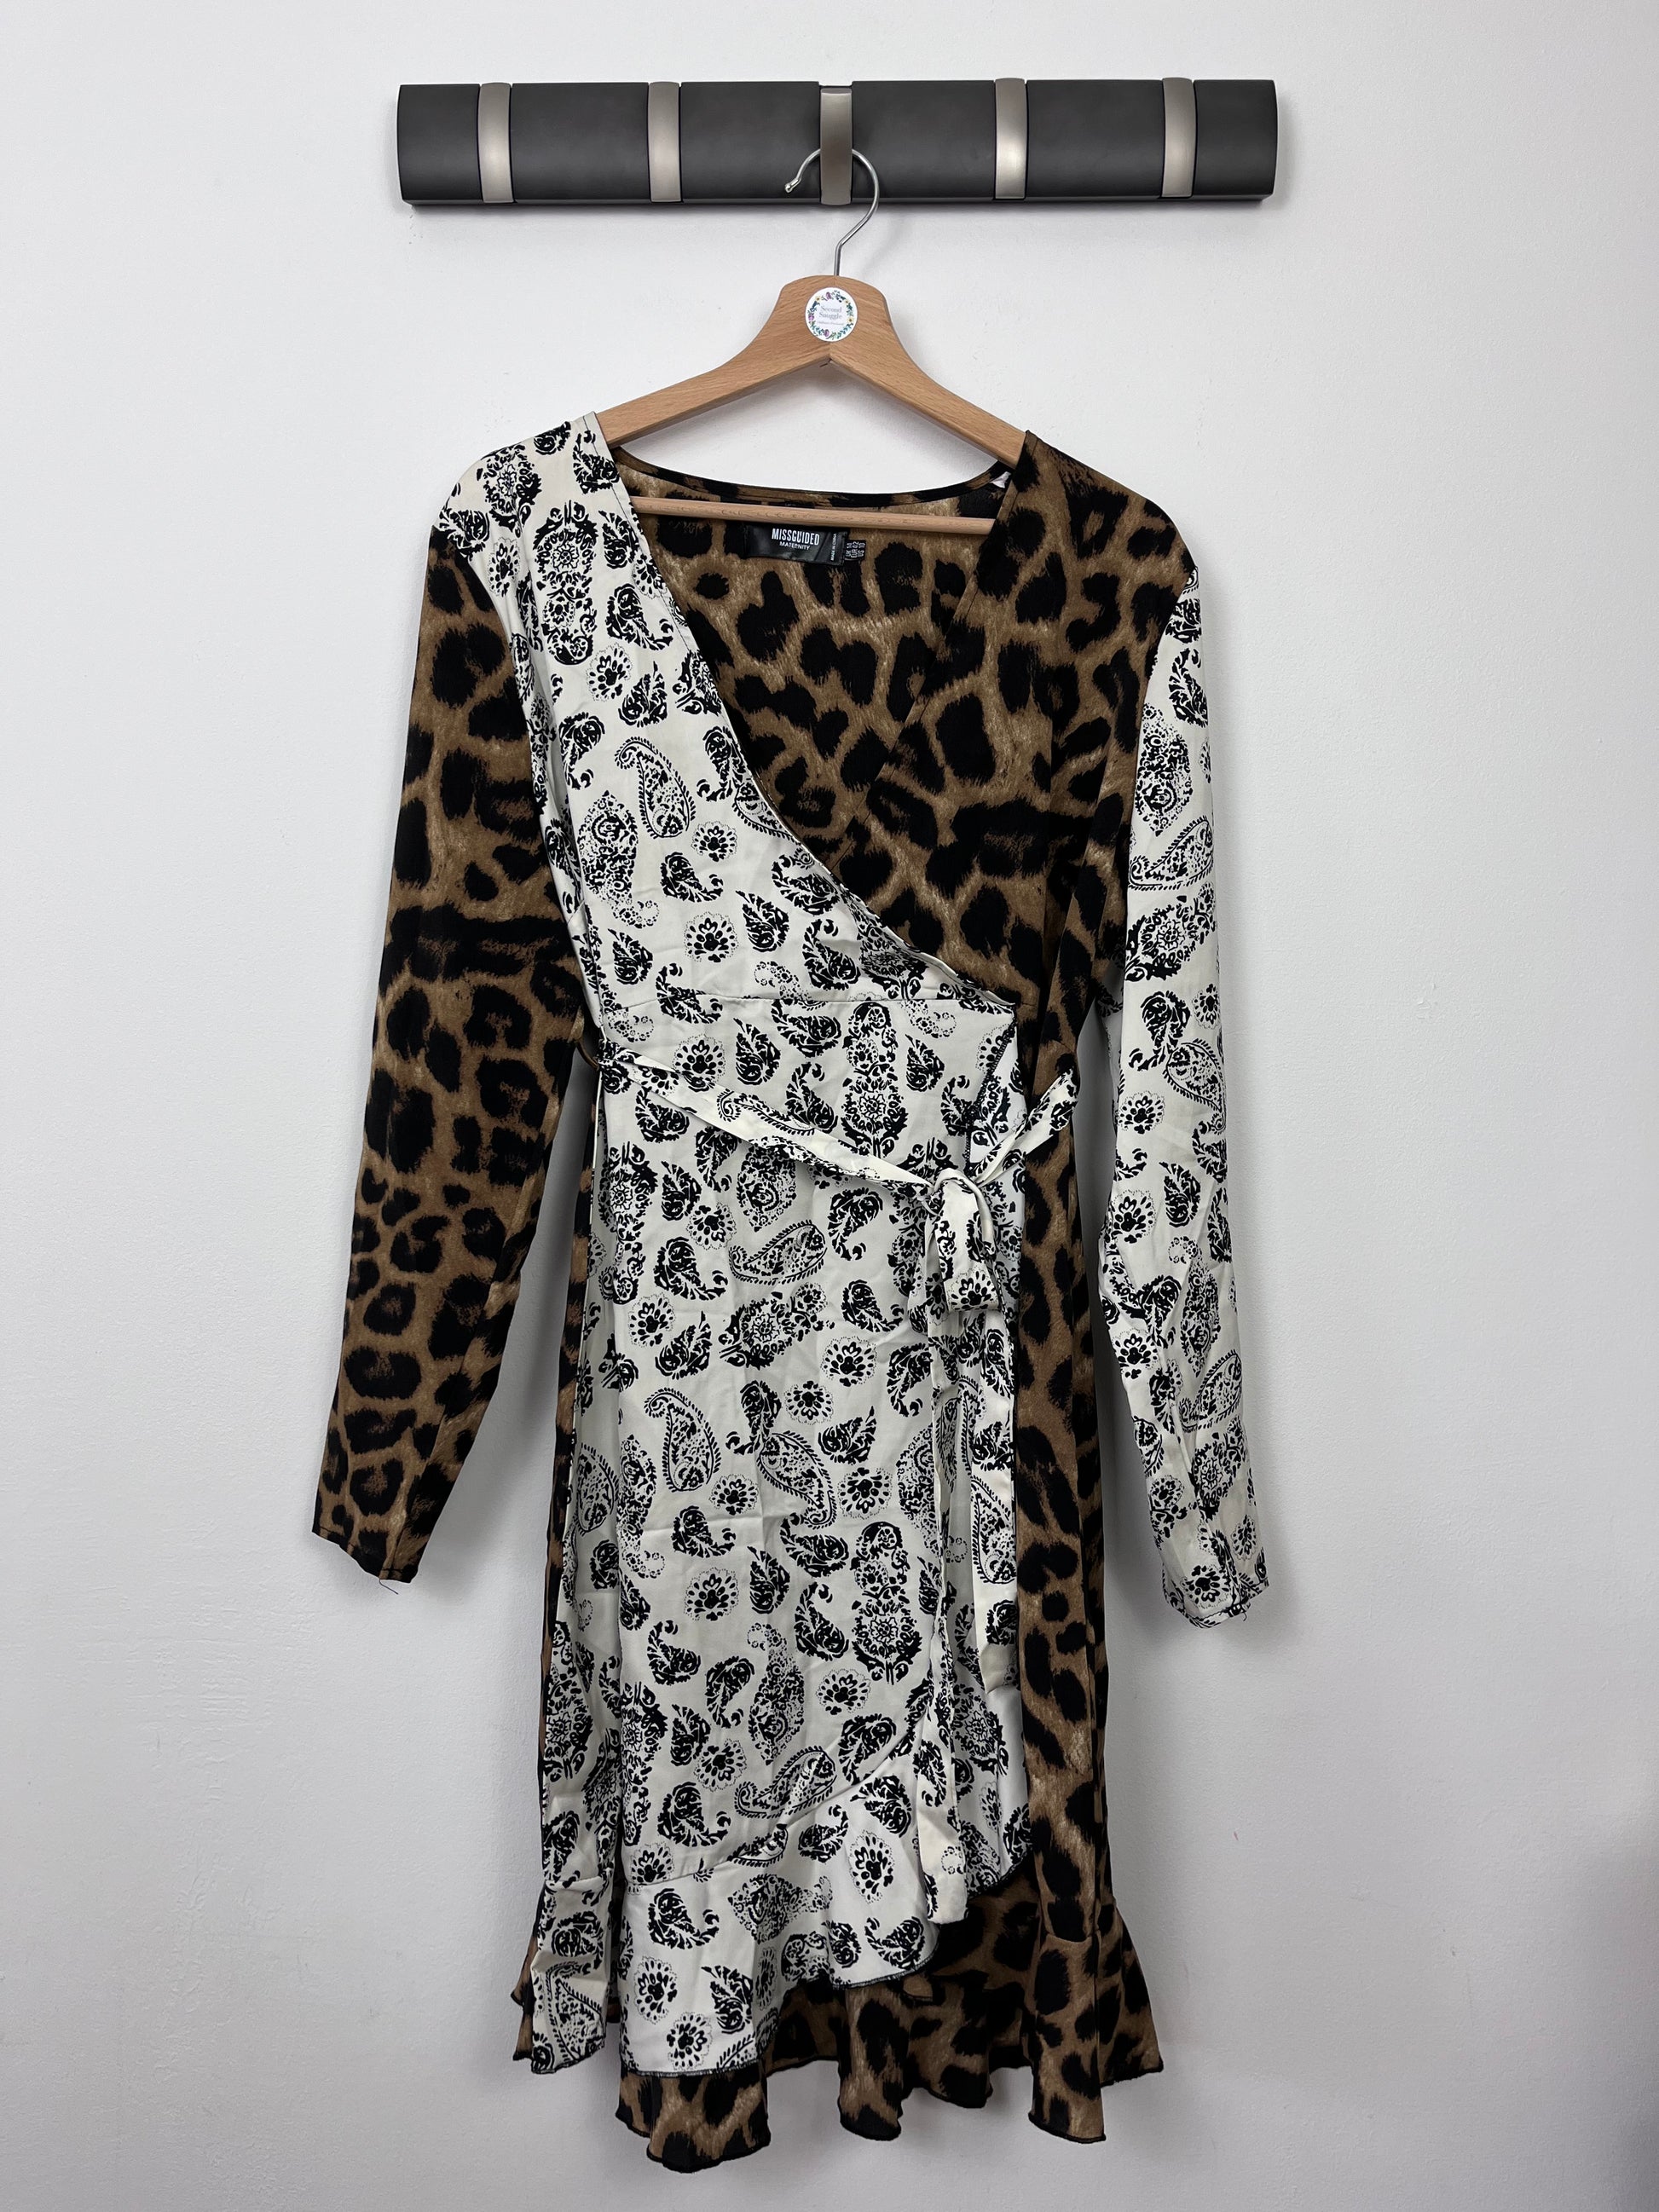 Missguided Maternity Size 14-Dresses-Second Snuggle Preloved